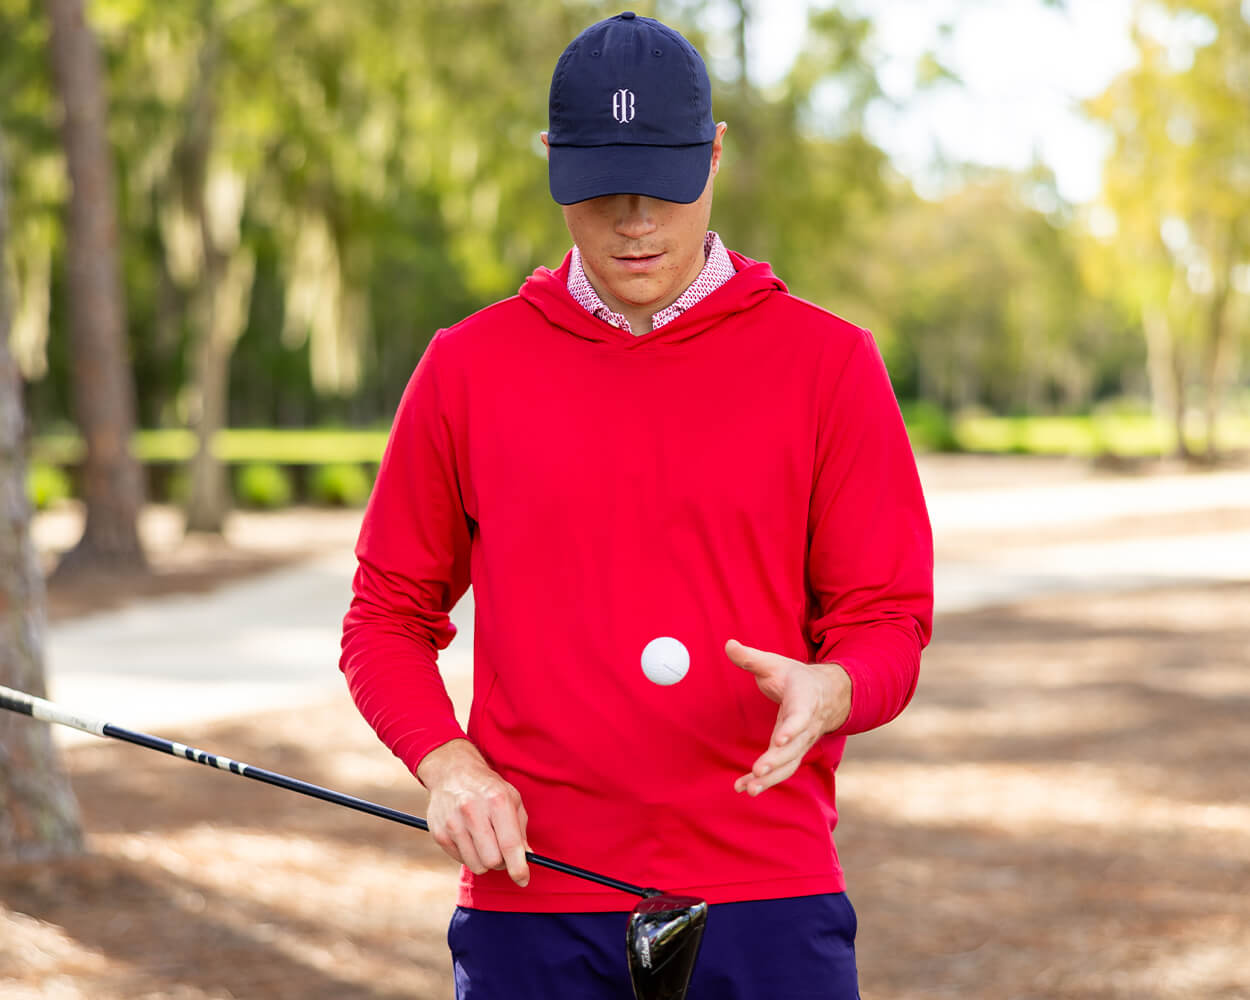 Holderness & Bourne The Jackson Men's Red Pullover Golf Hoodie